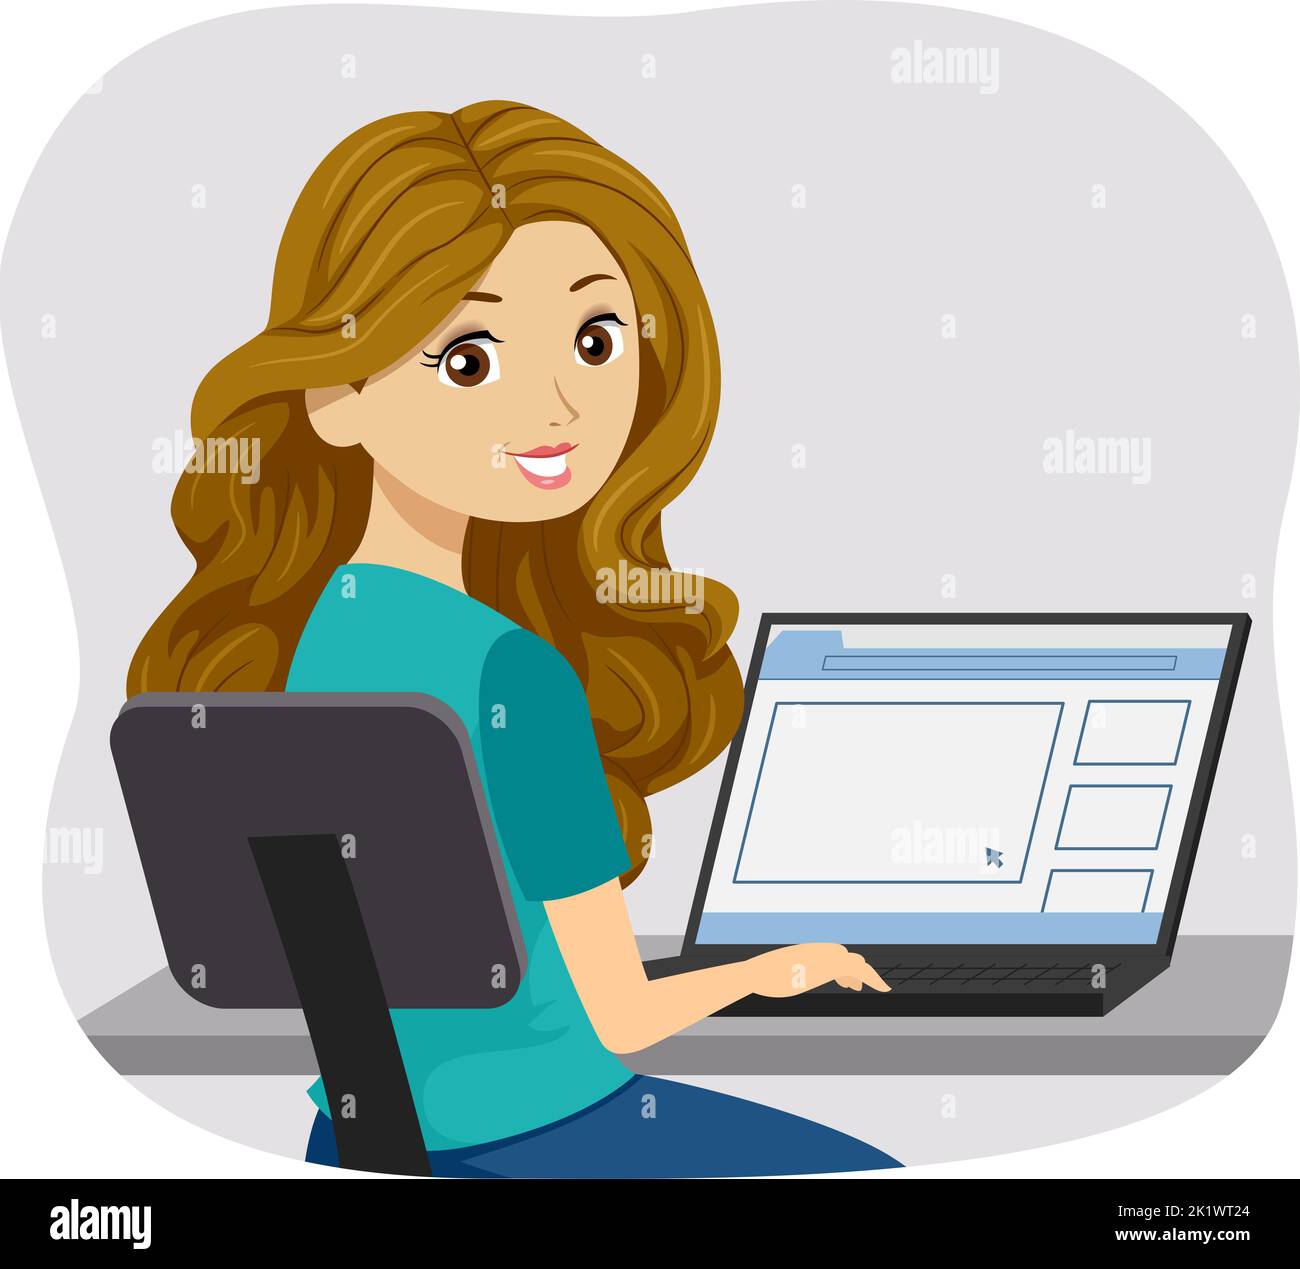 Illustration of Teen Girl Sitting on Swivel Chair and Watching Online Videos on Her Laptop Stock Photo